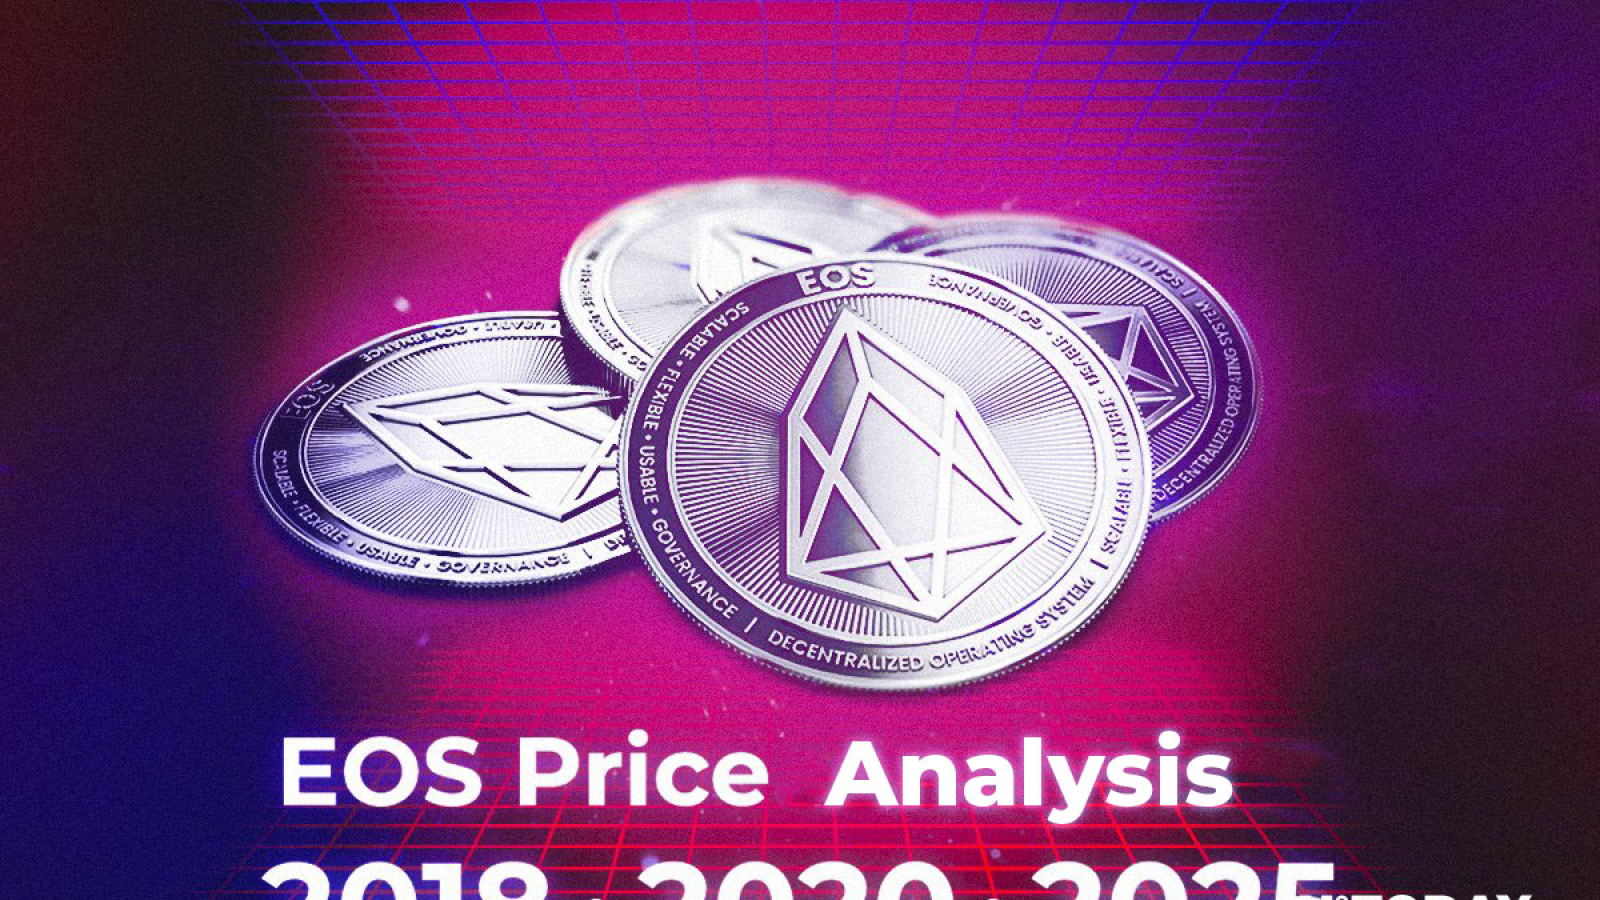 EOS Price Analysis: How Much Might EOS Cost in 2018, 2020, 2025?